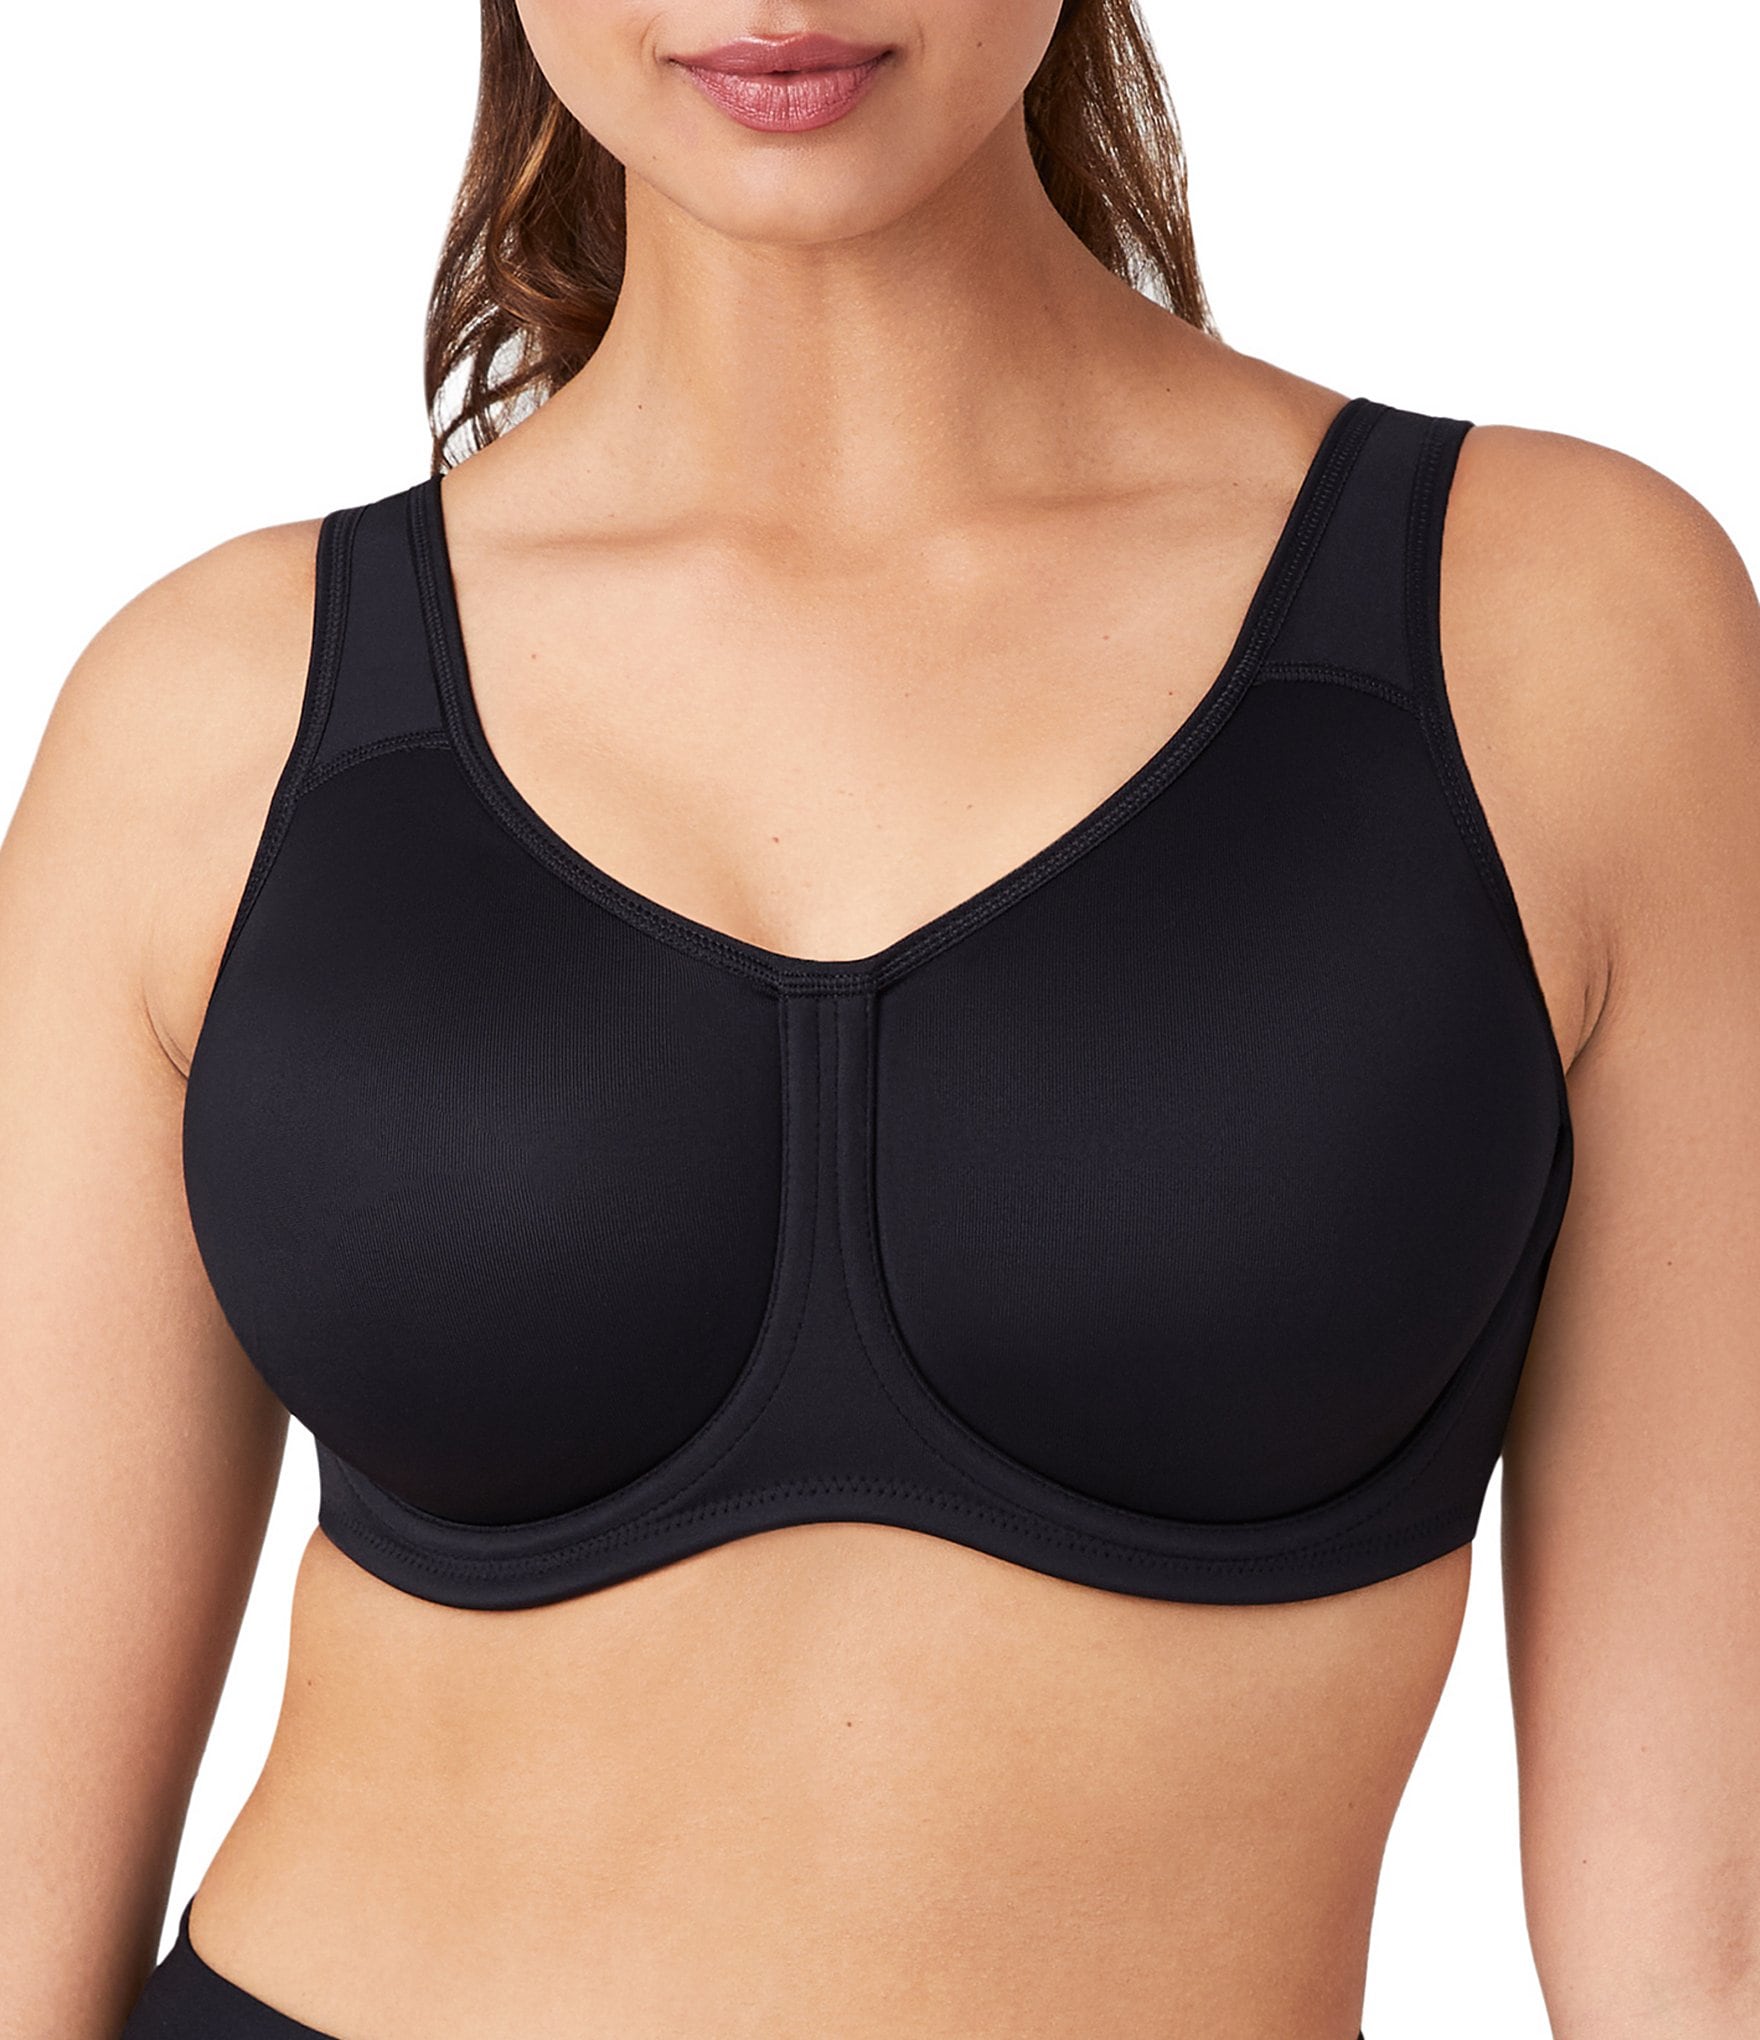 Buy Selfcare Set Of 4 Women's New Seamless Sports Bras Online at Low Prices  in India 